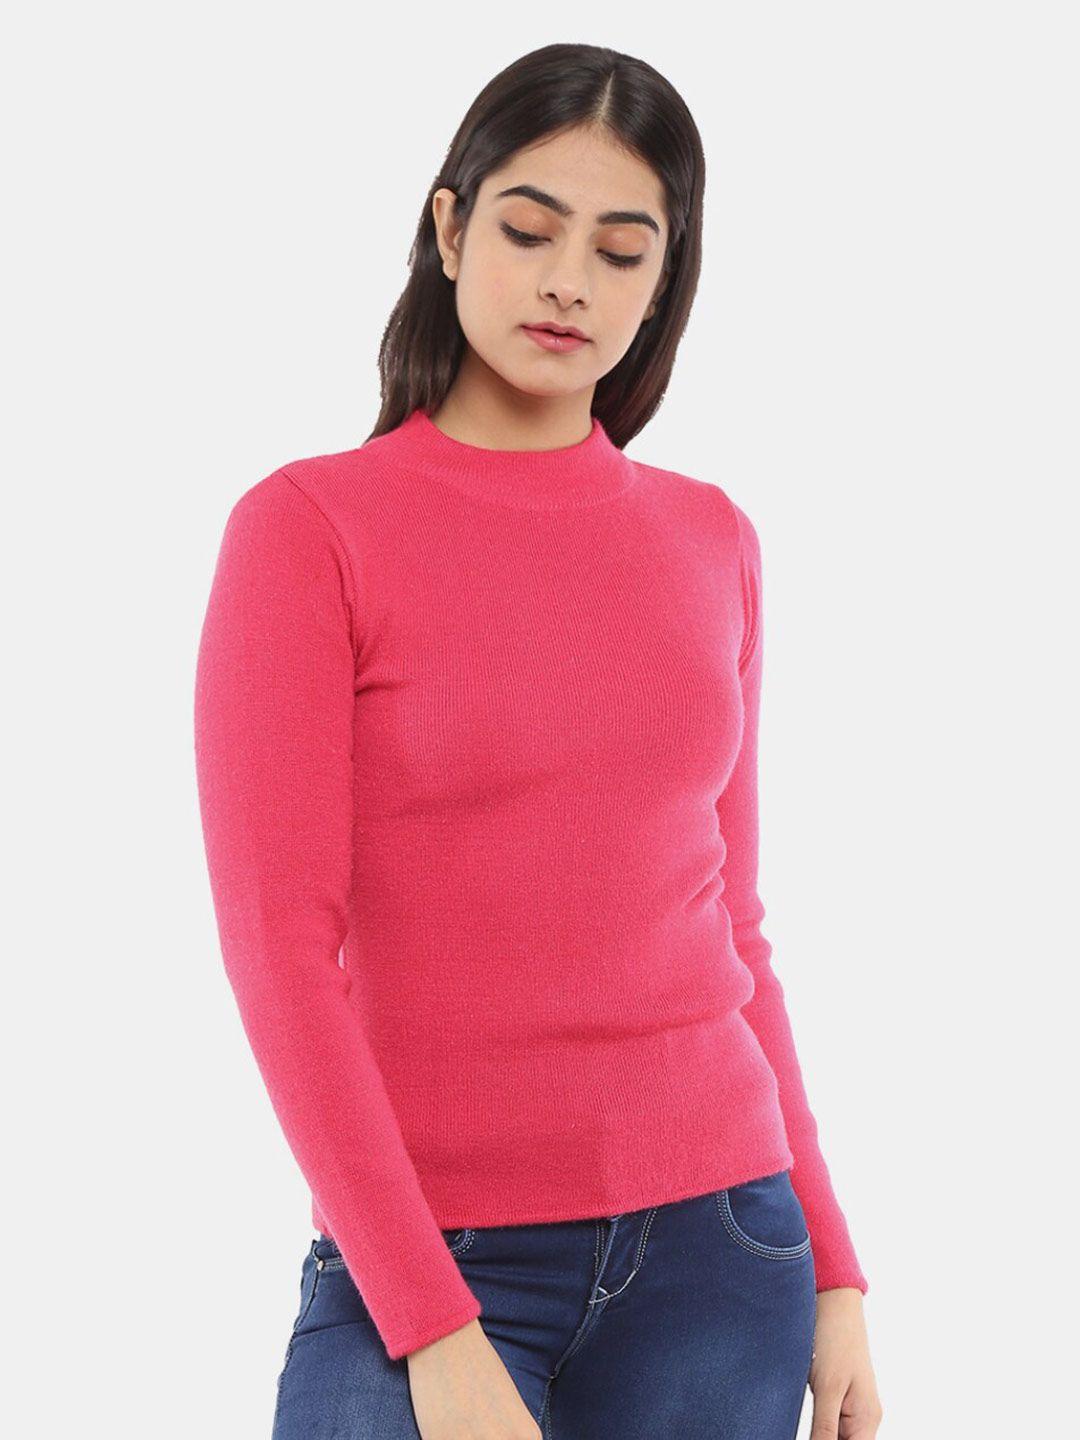 v-mart high neck cotton pullover sweater